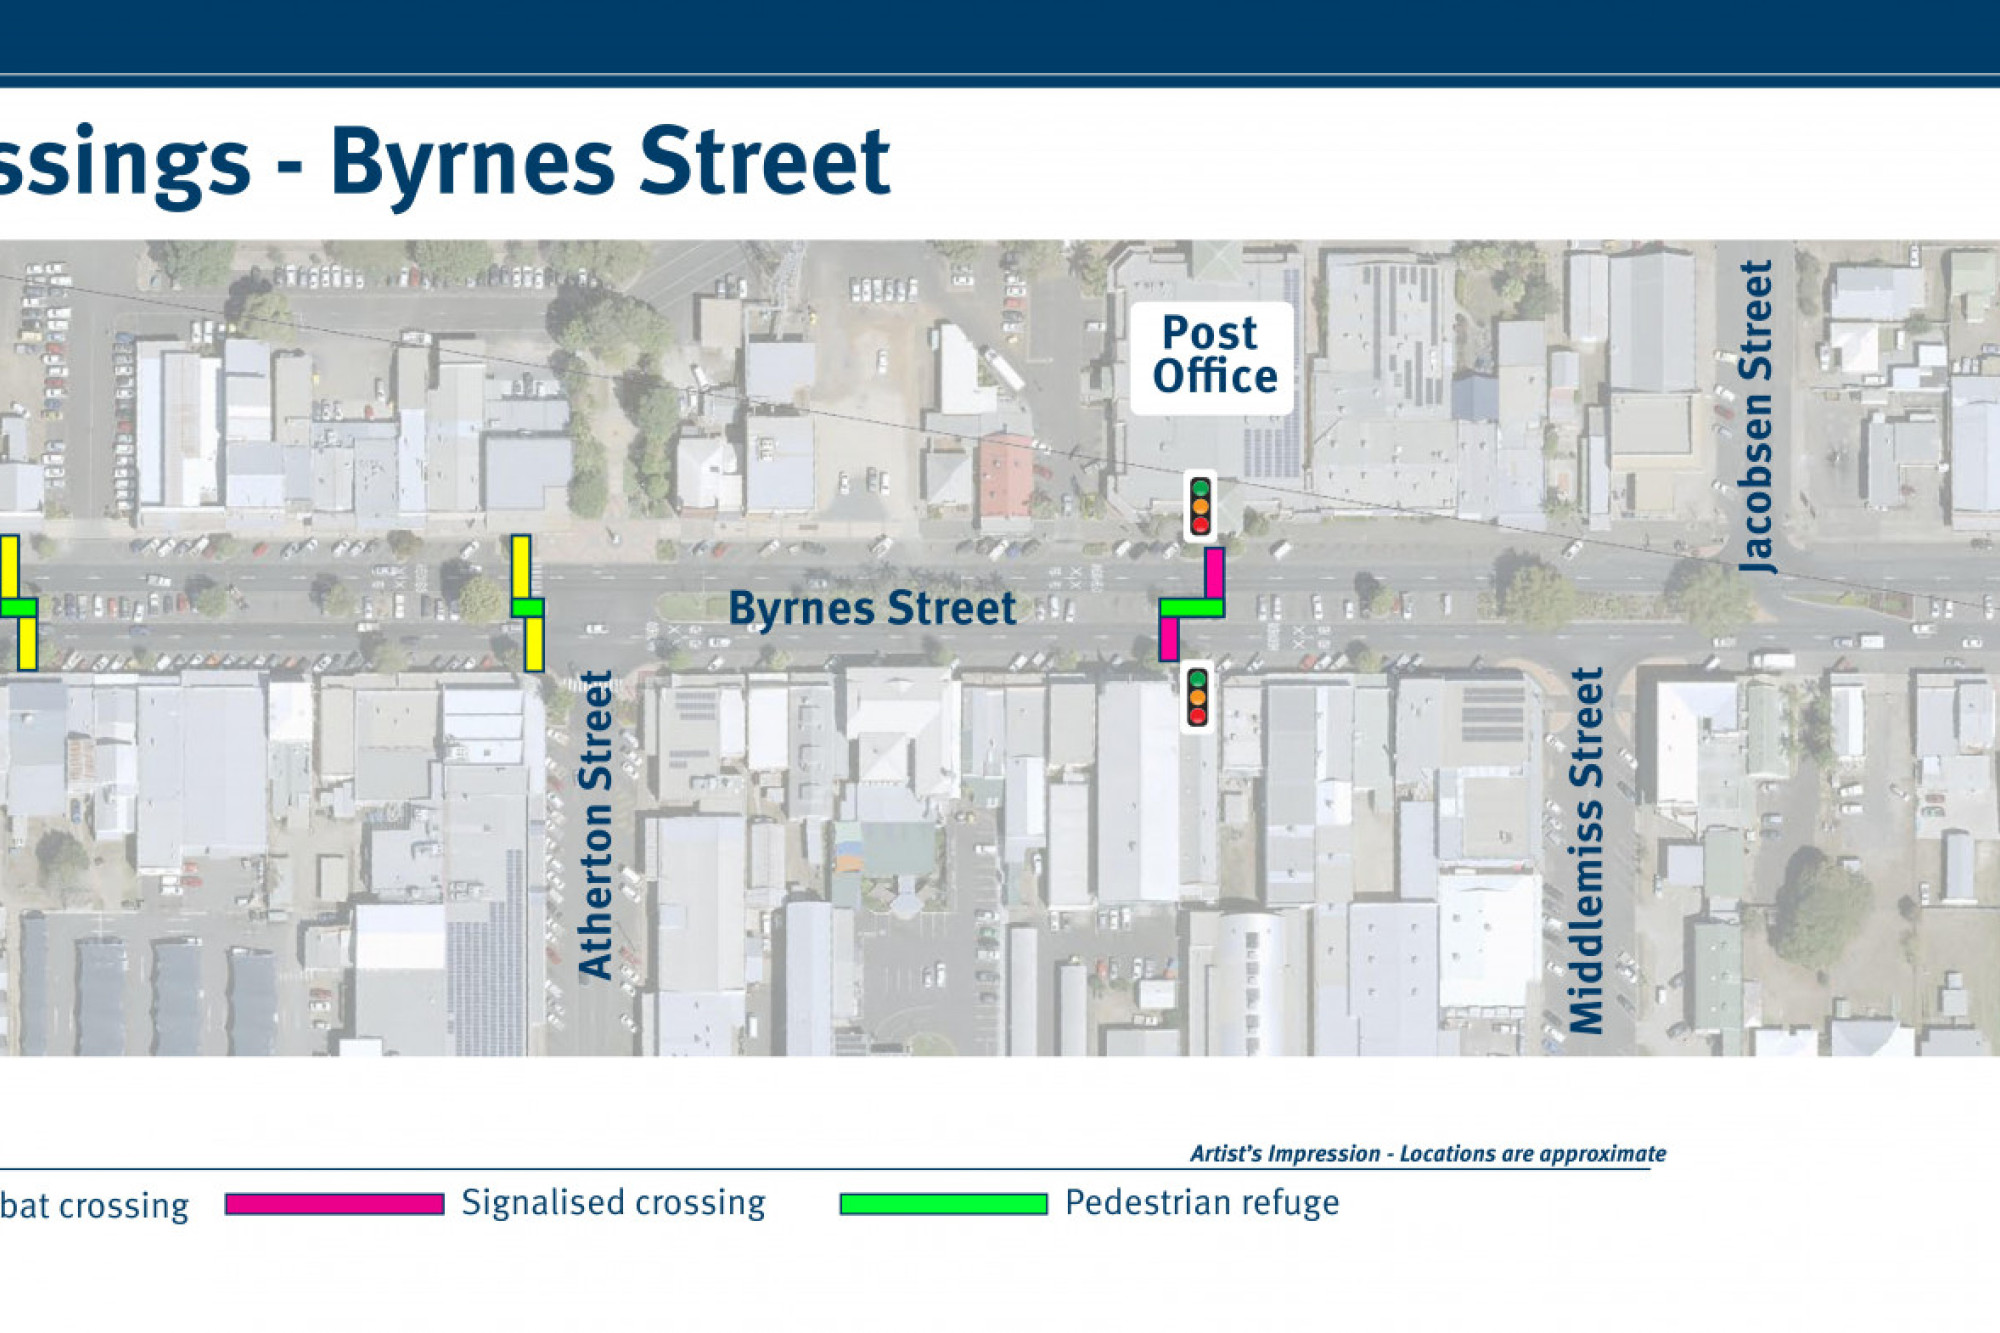 A plan of the where the new crossings will be installed on Byrnes Street.